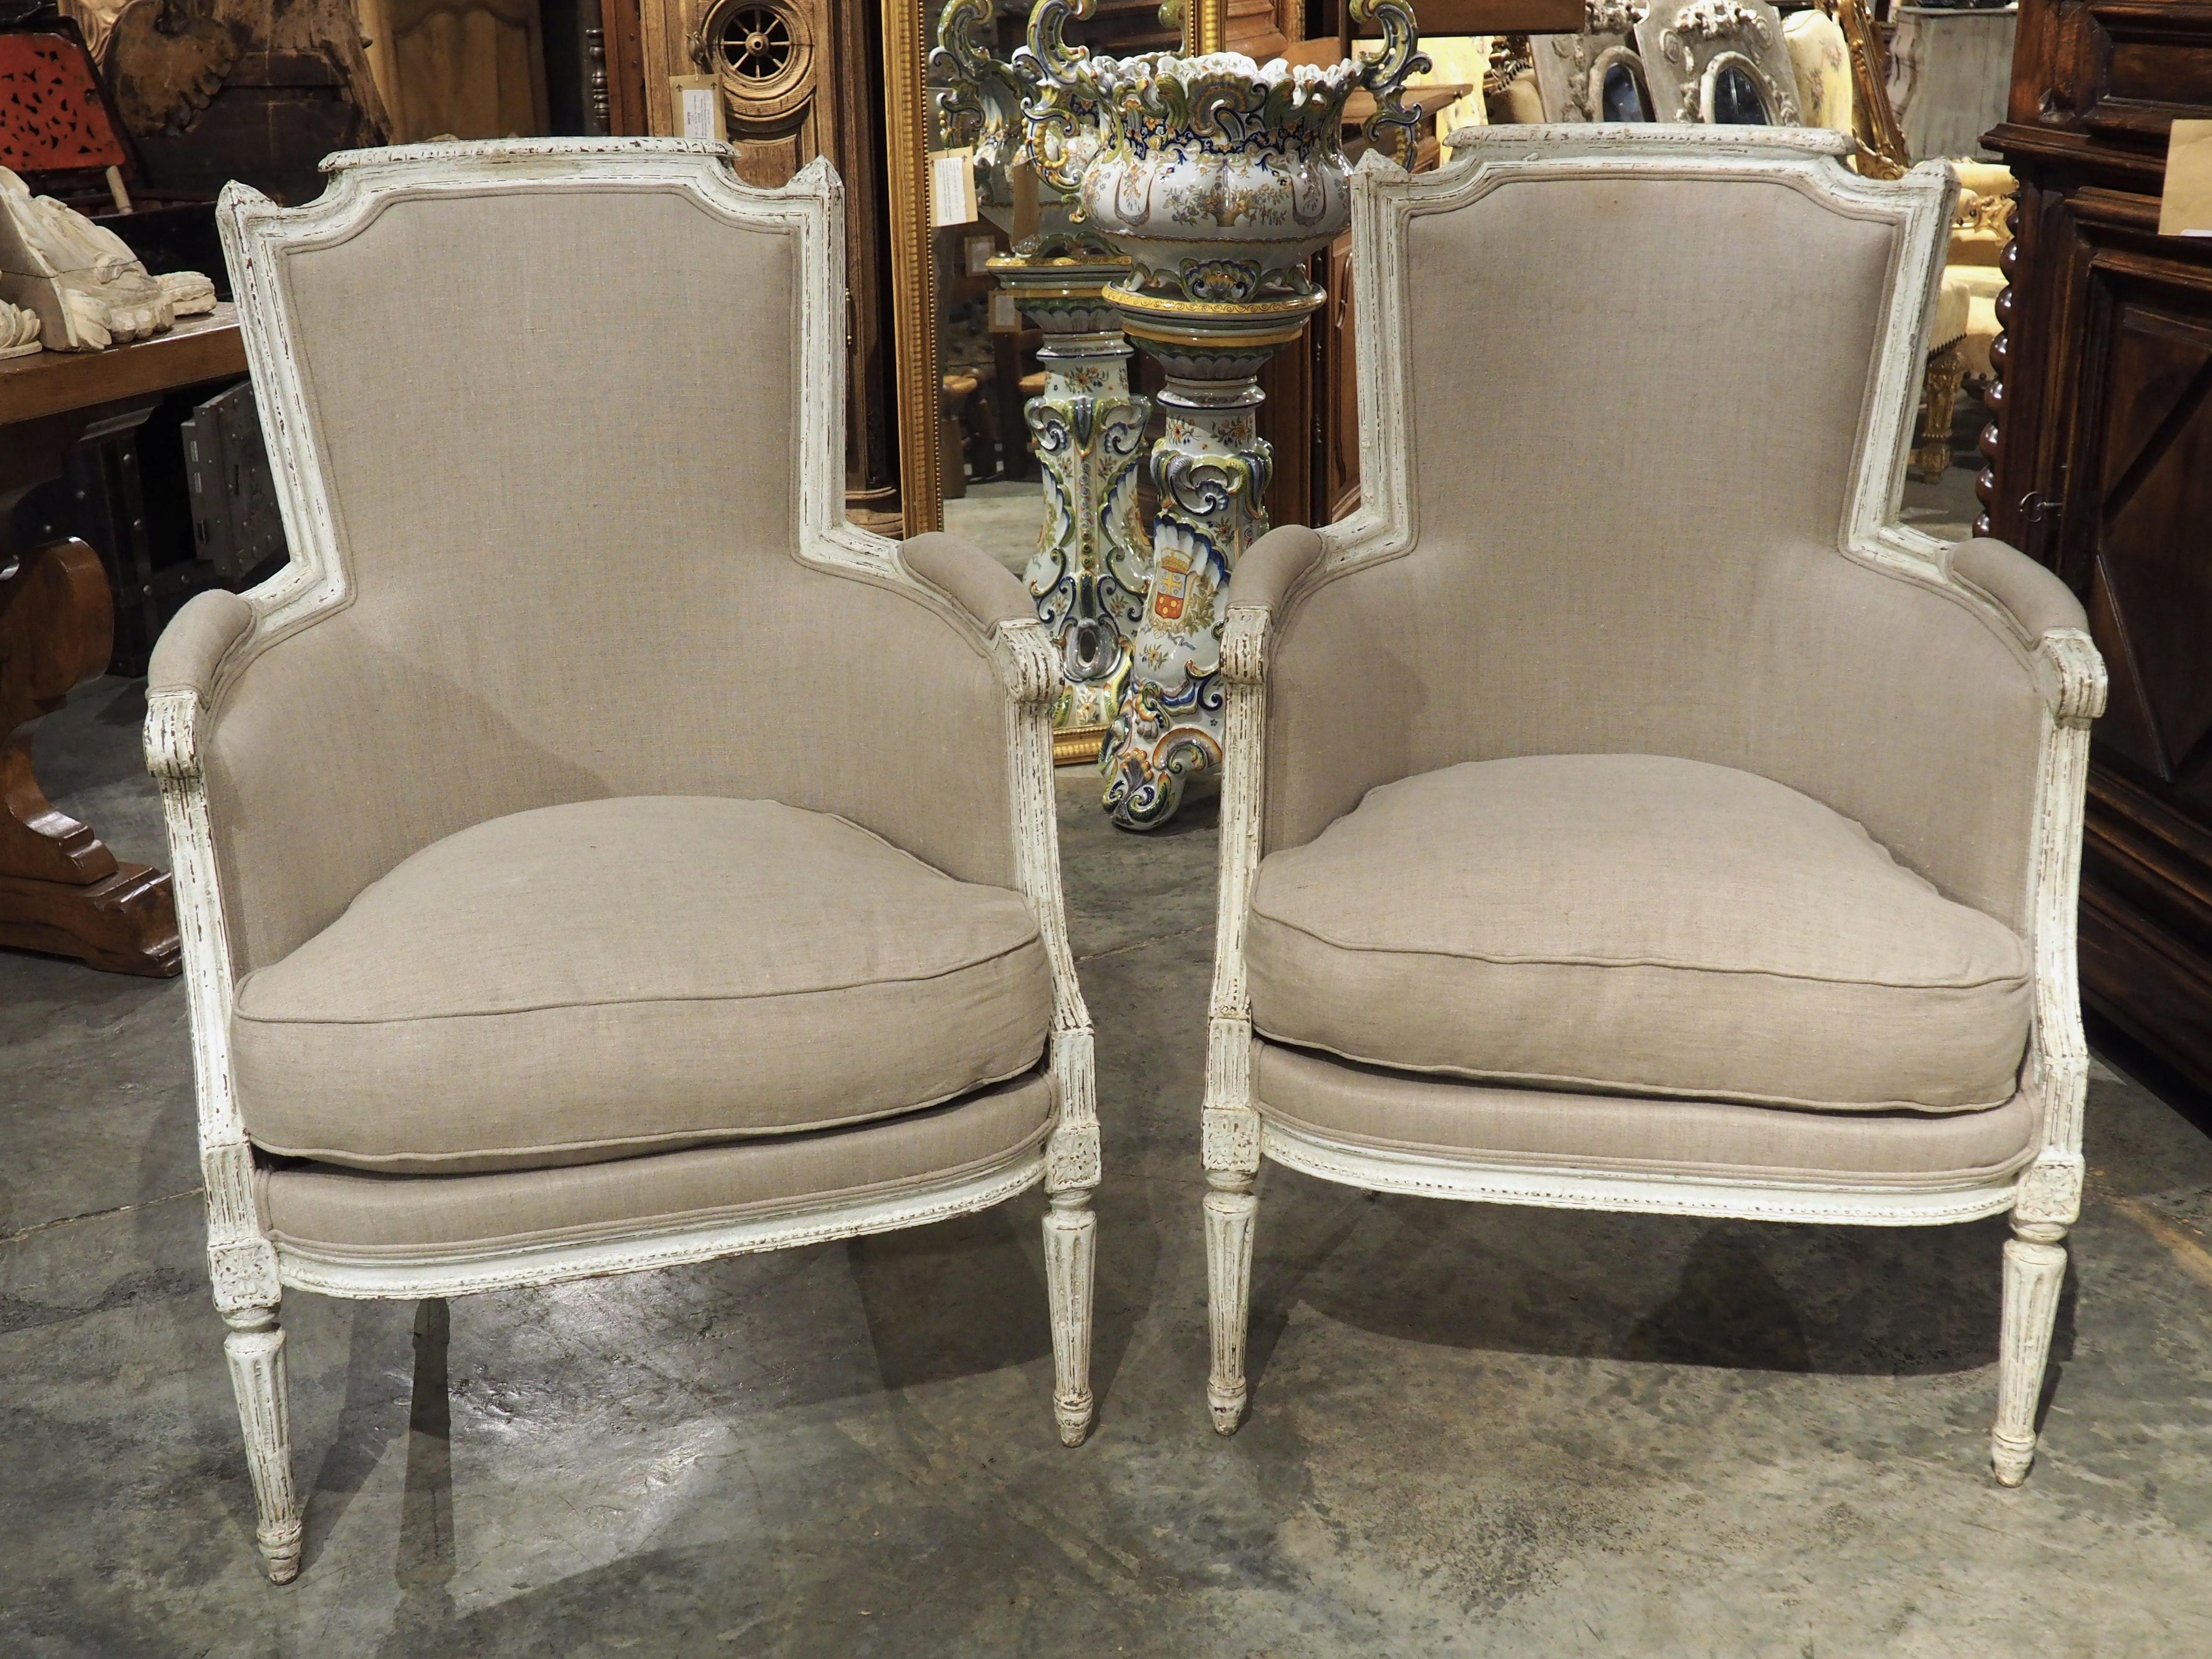 Pair of Antique French Painted Directoire Style Armchairs, Circa 1900 For Sale 11